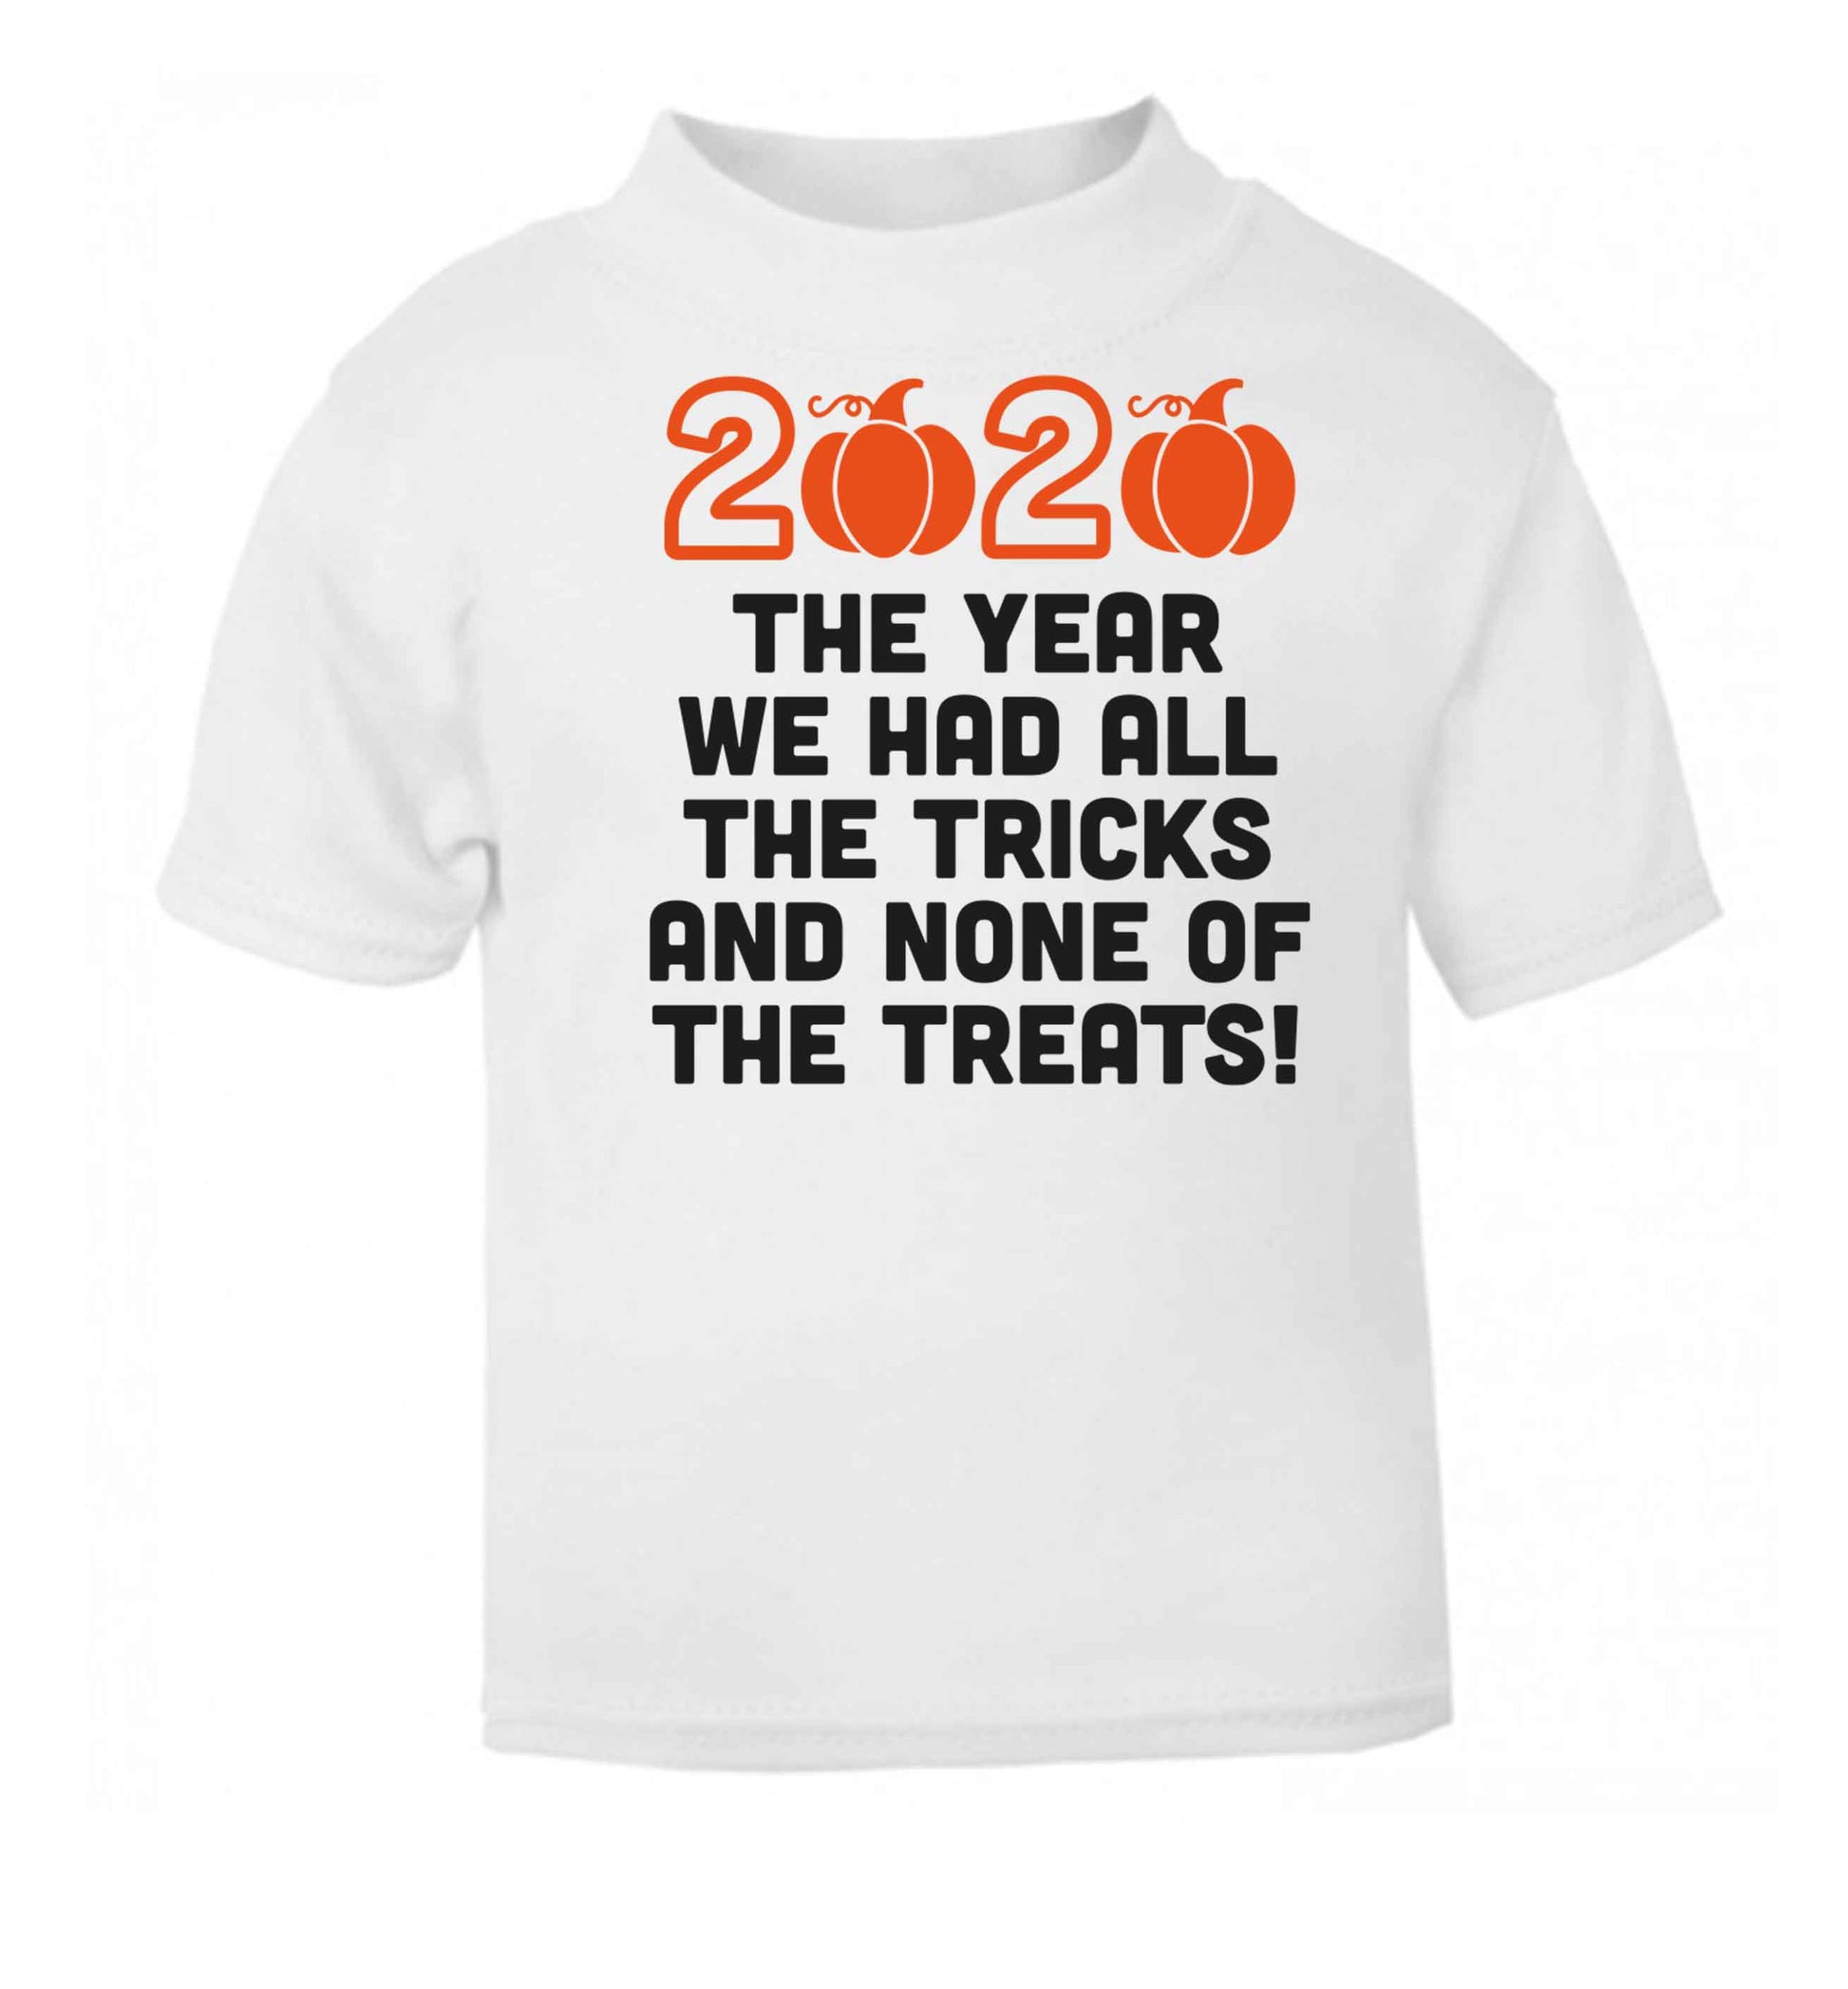 2020 The year we had all of the tricks and none of the treats white baby toddler Tshirt 2 Years